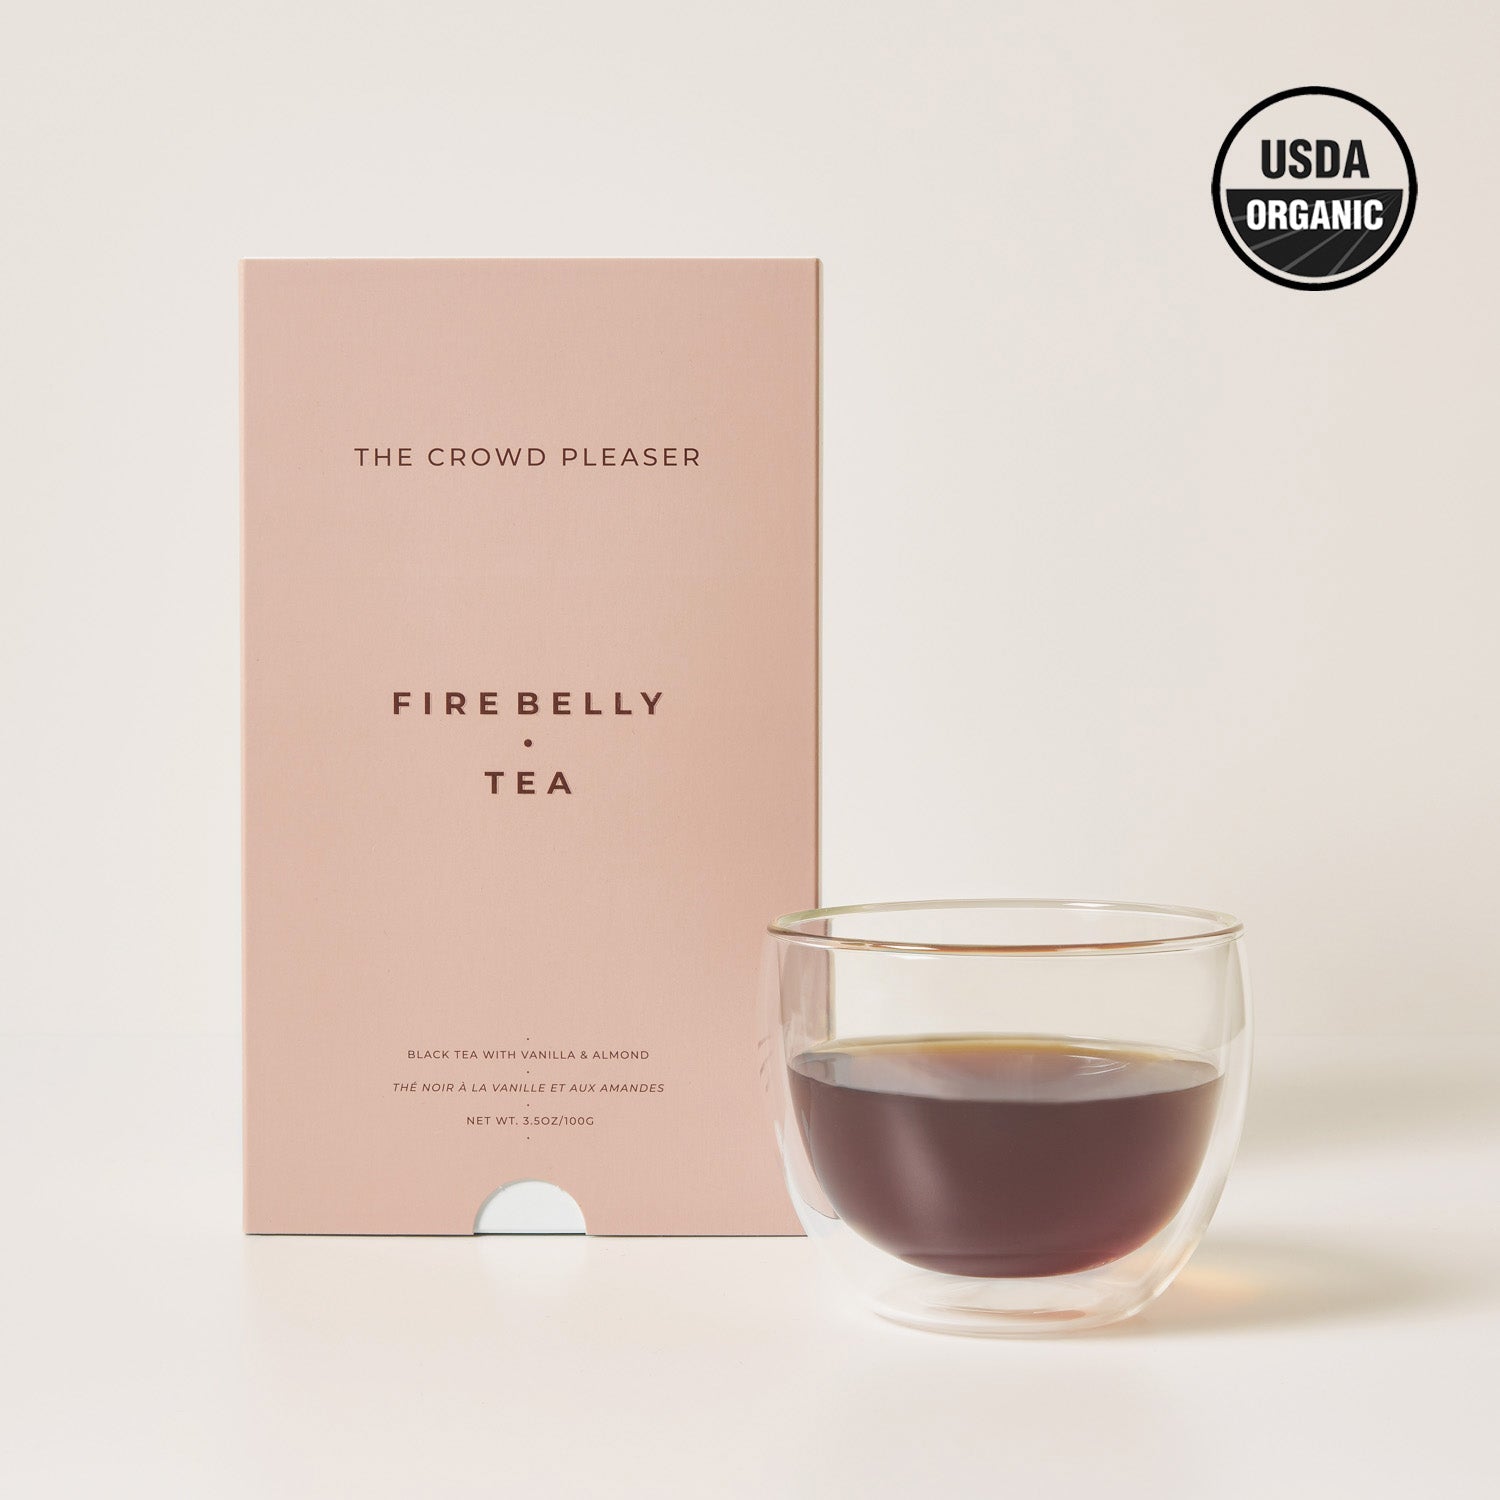 The Crowd Pleaser - Firebelly Tea